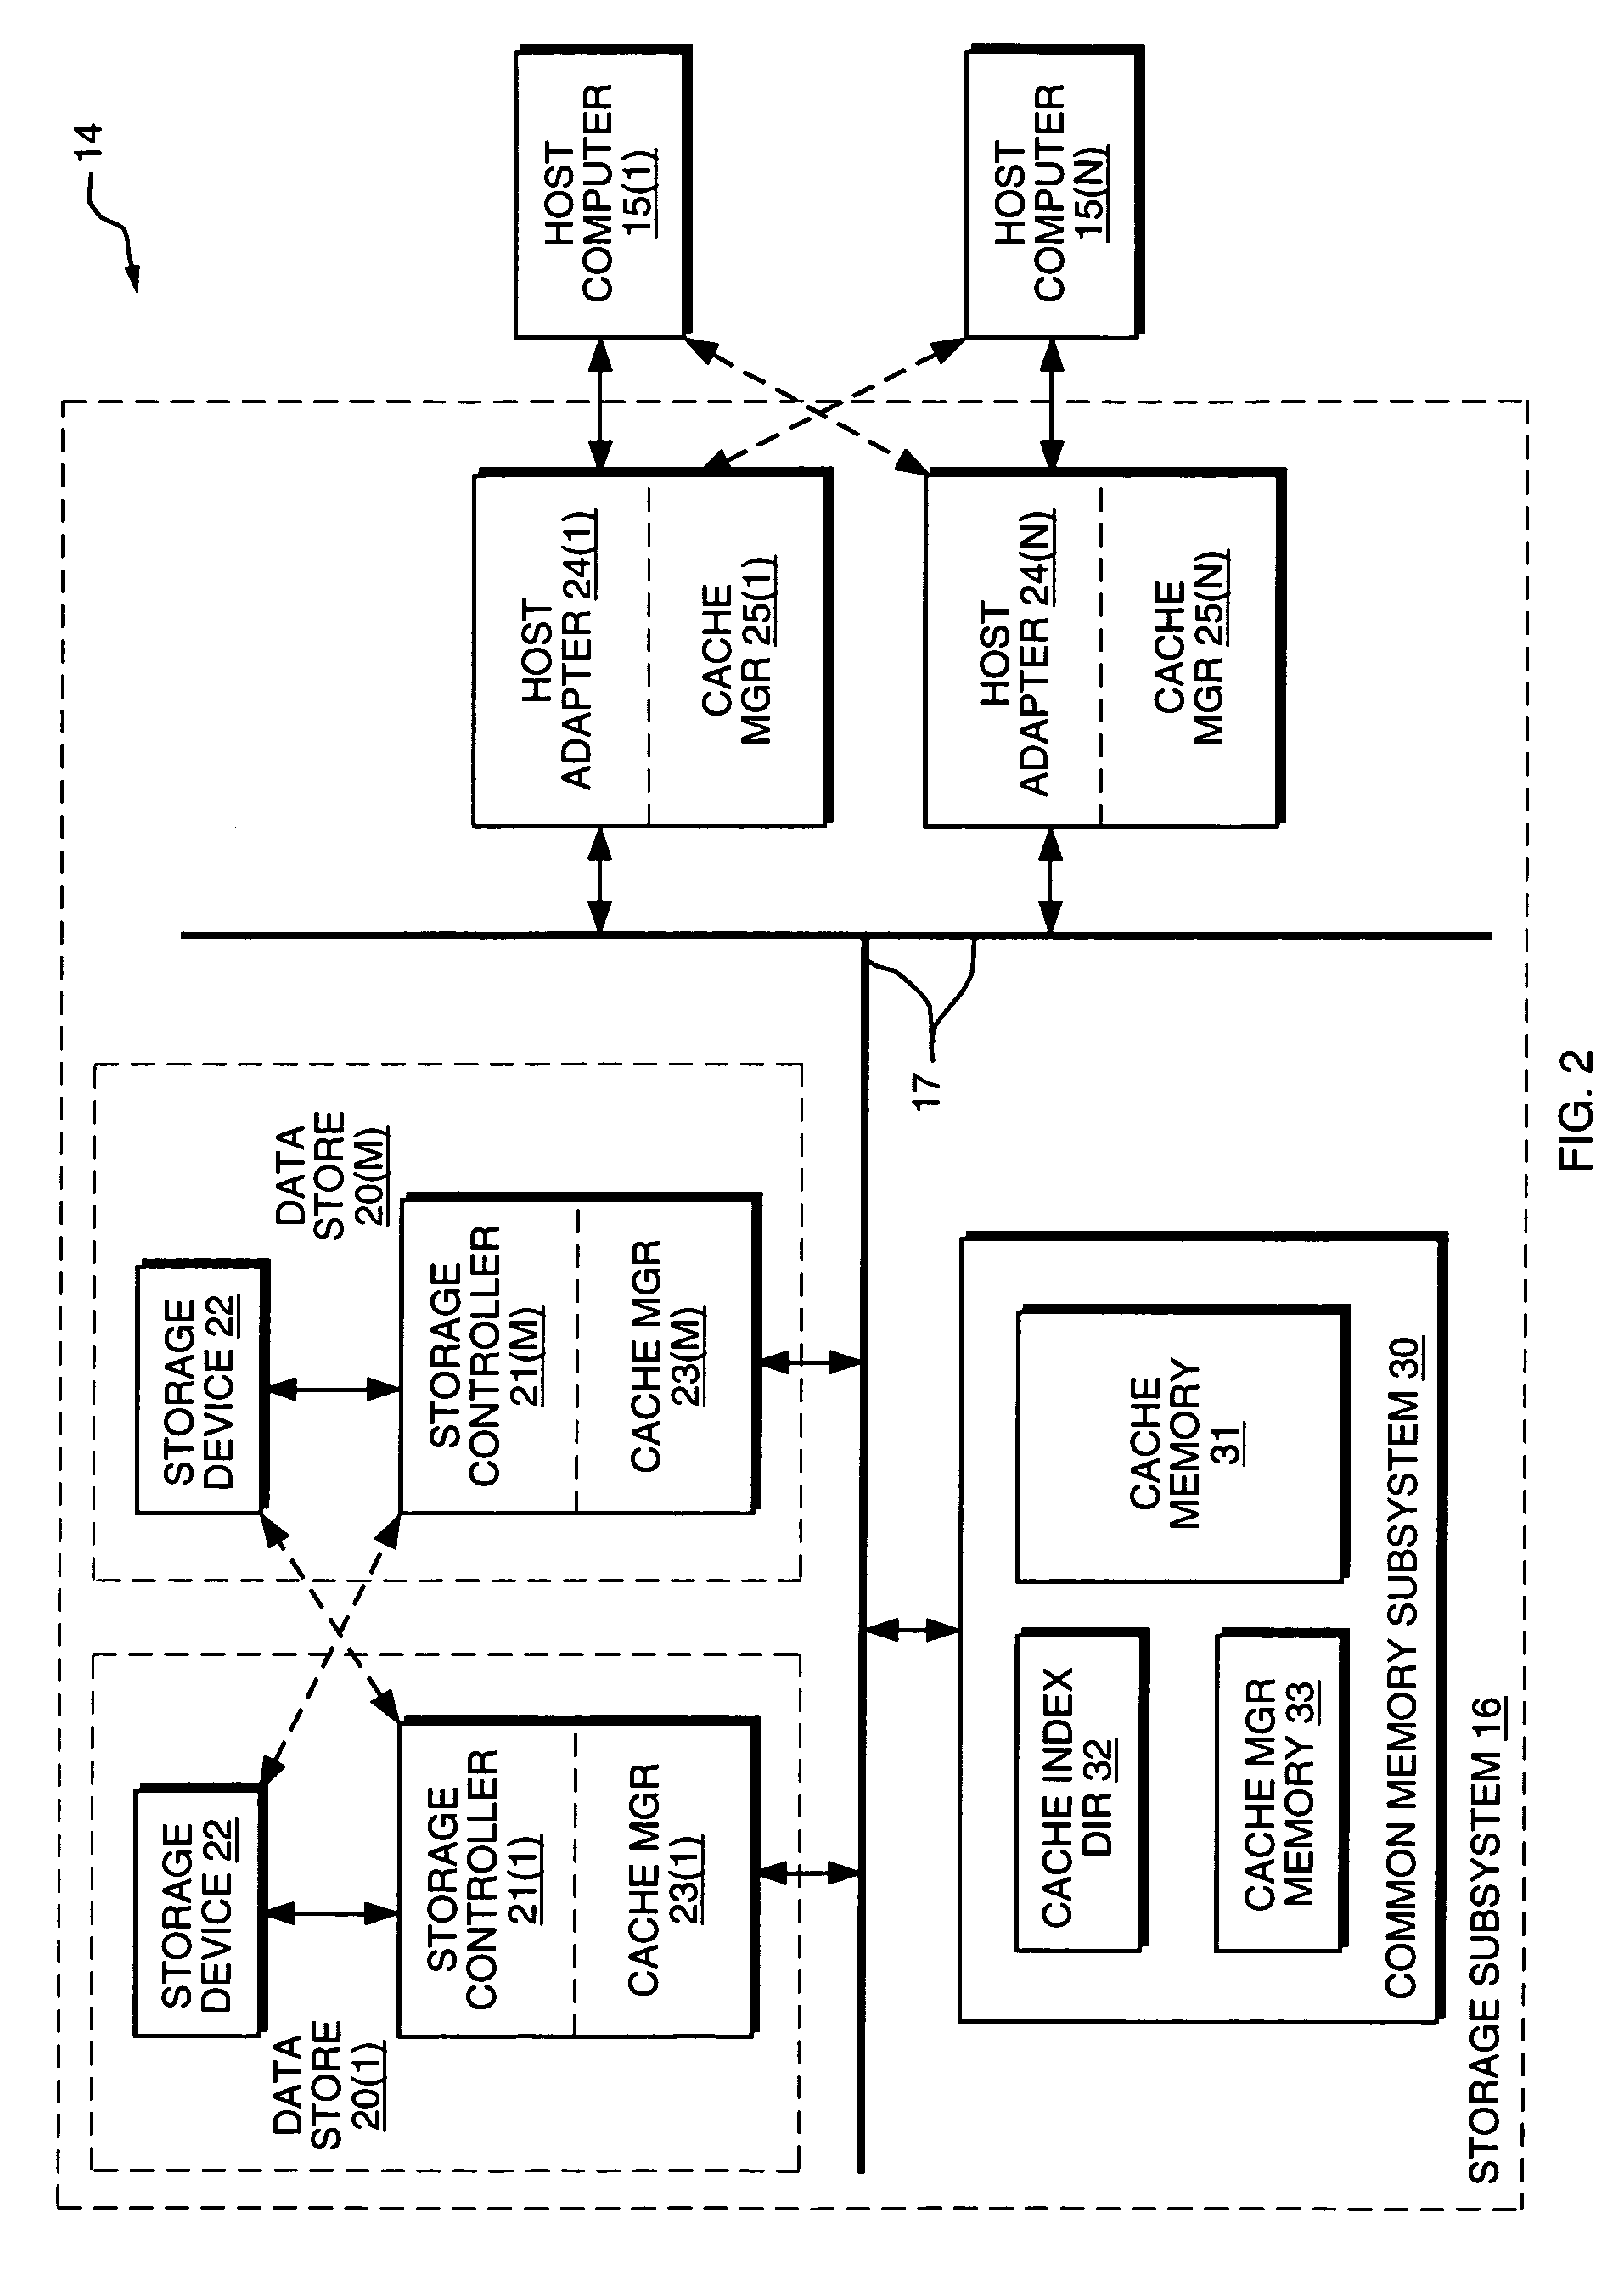 System and method for assessing the effectiveness of a cache memory or portion thereof using FIFO or LRU using cache utilization statistics